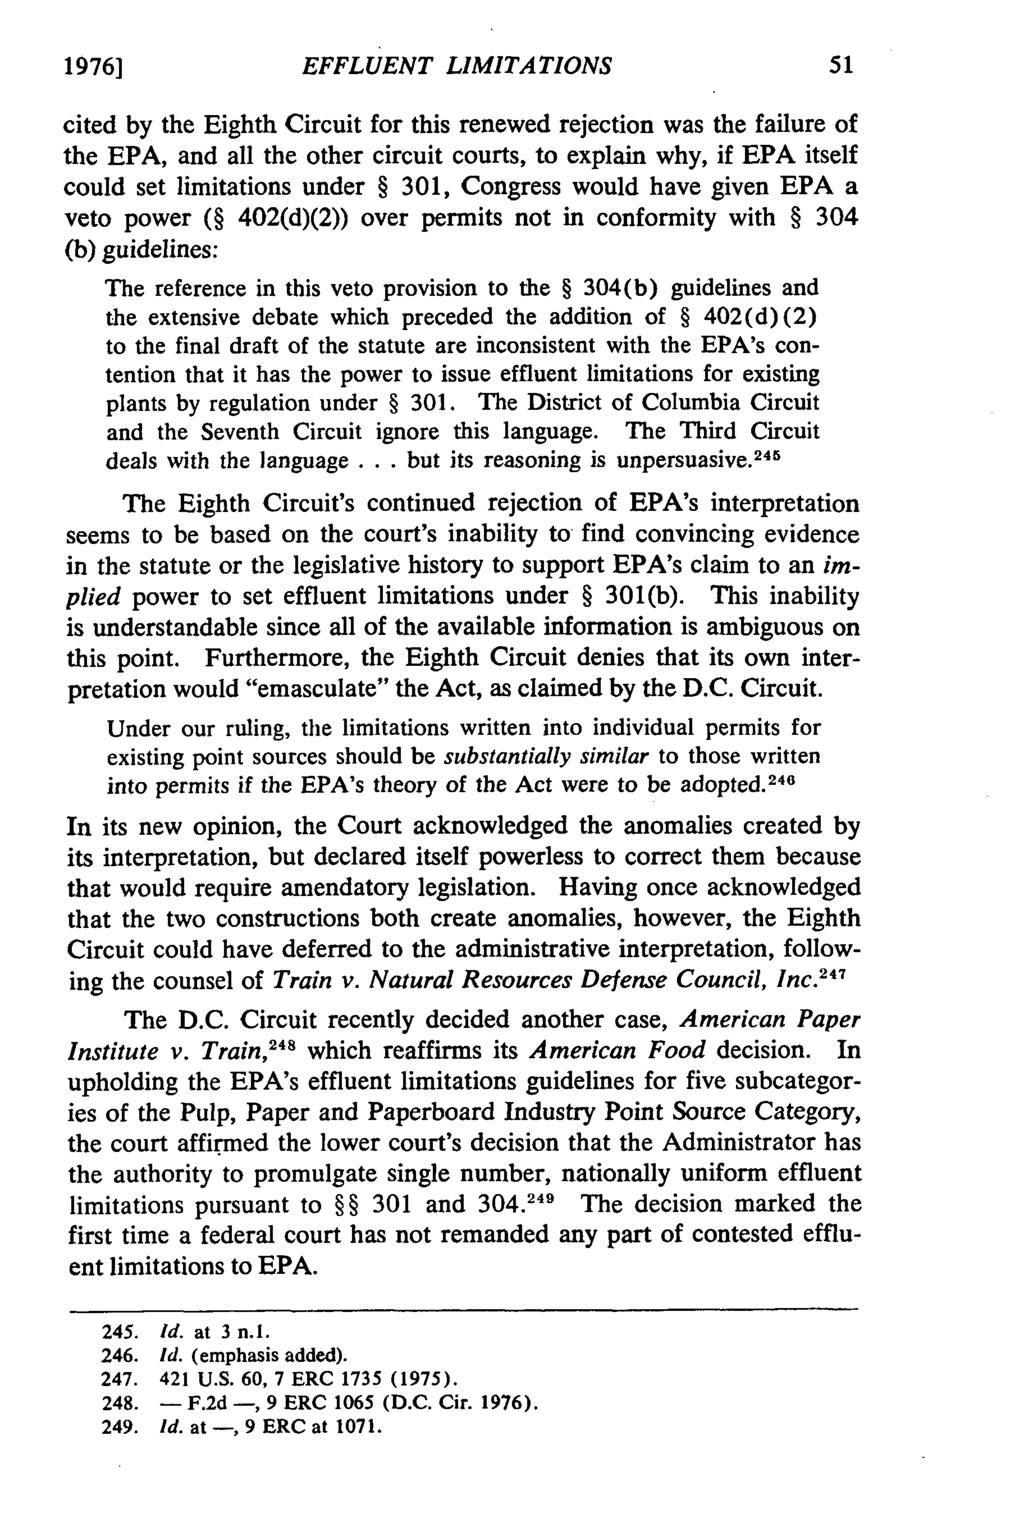 1976] EFFLUENT LIMITATIONS cited by the Eighth Circuit for this renewed rejection was the failure of the EPA, and all the other circuit courts, to explain why, if EPA itself could set limitations